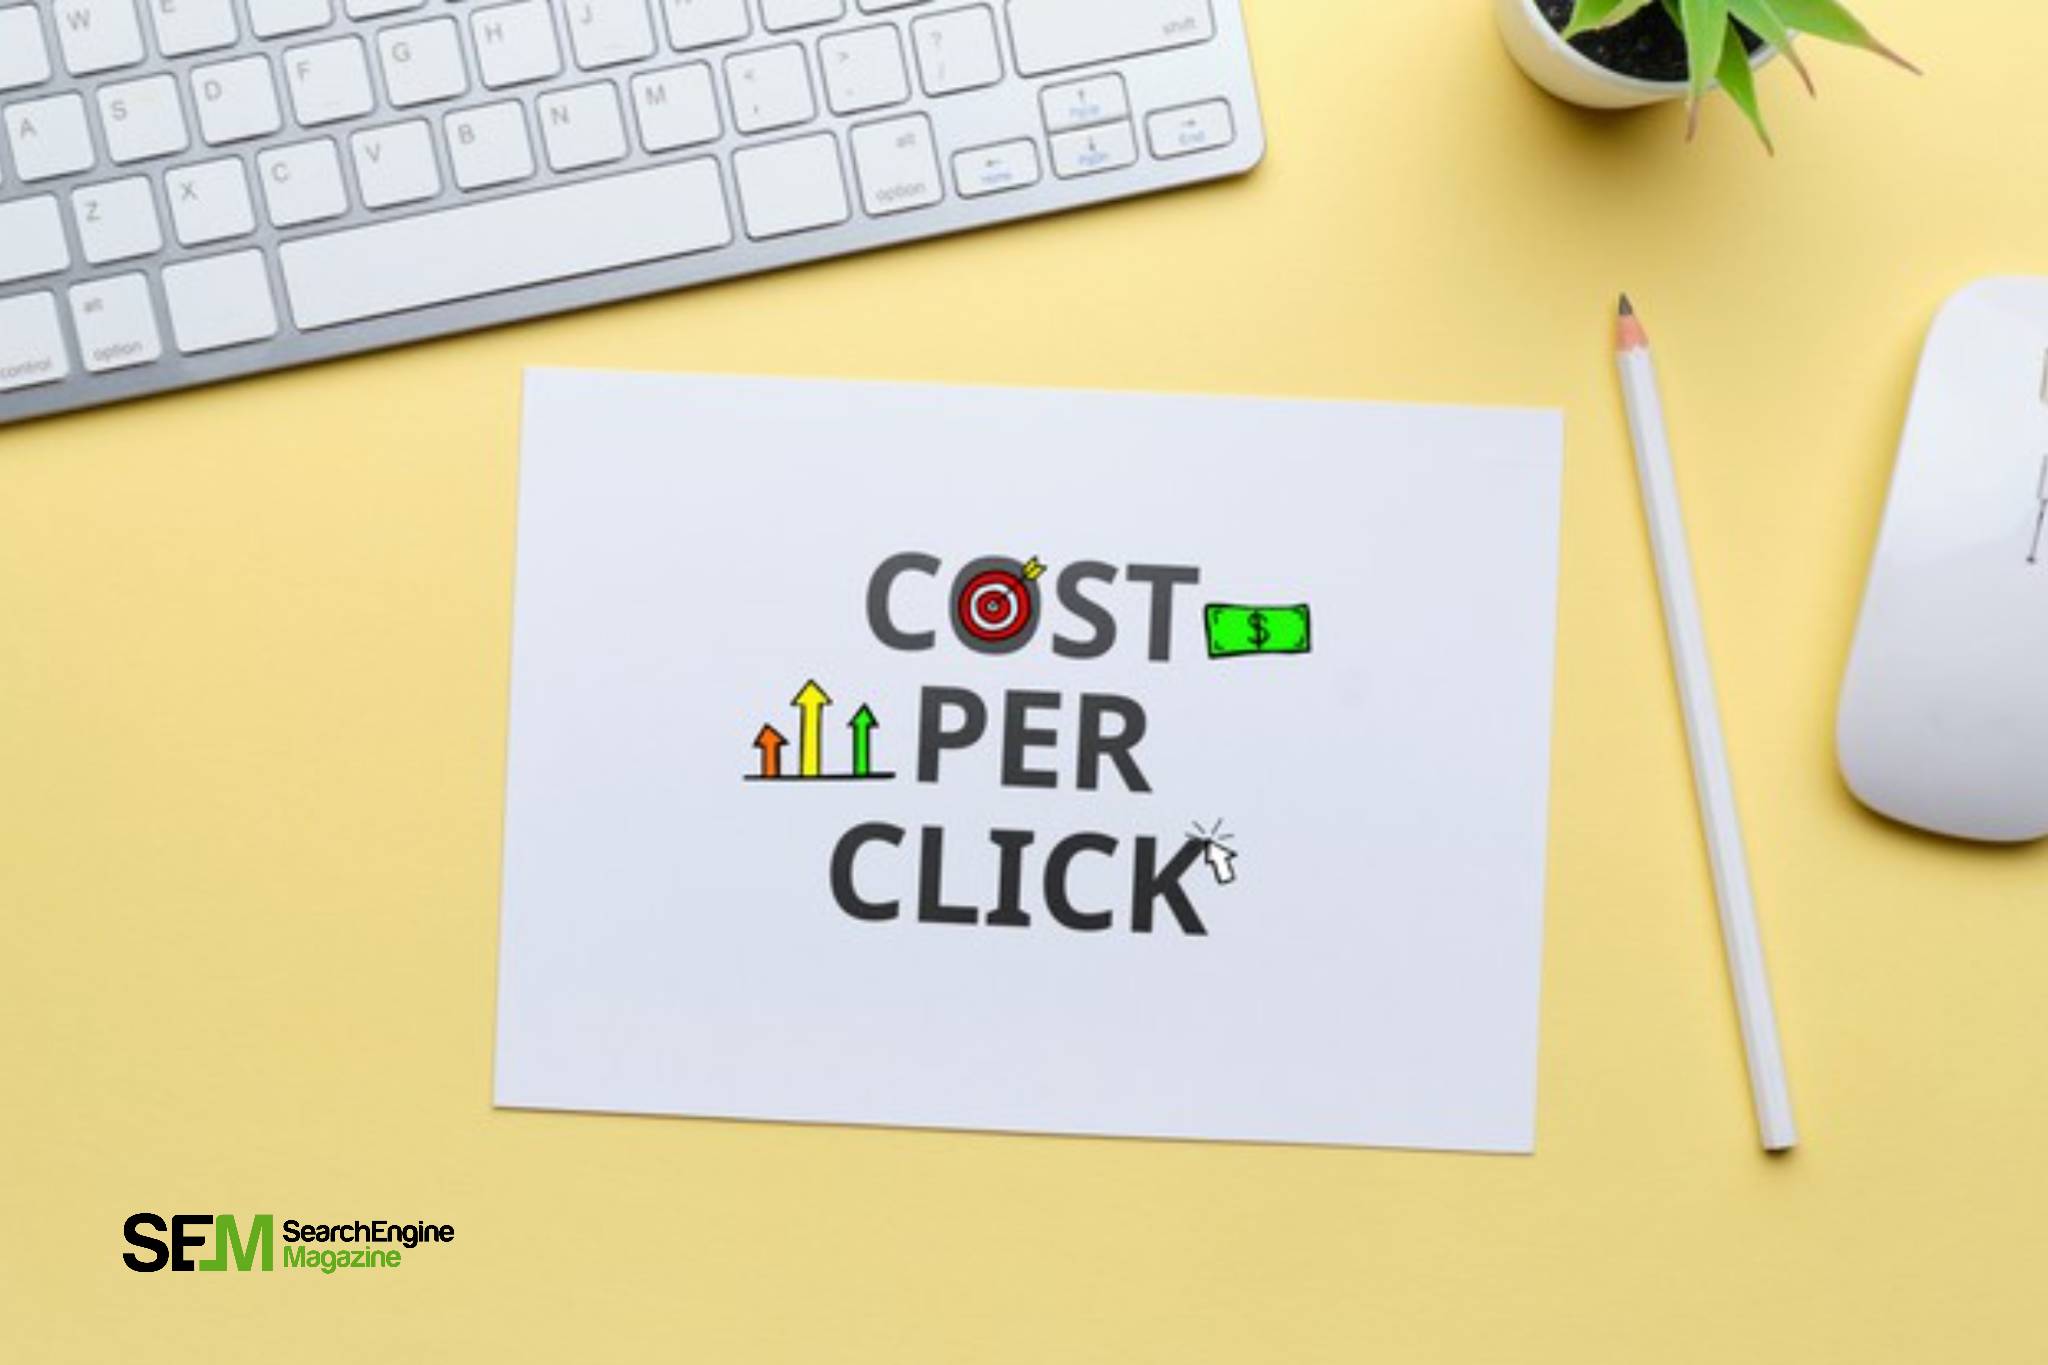 One factor the google ads system uses to calculate an ad's actual cost-per-click (cpc) is the